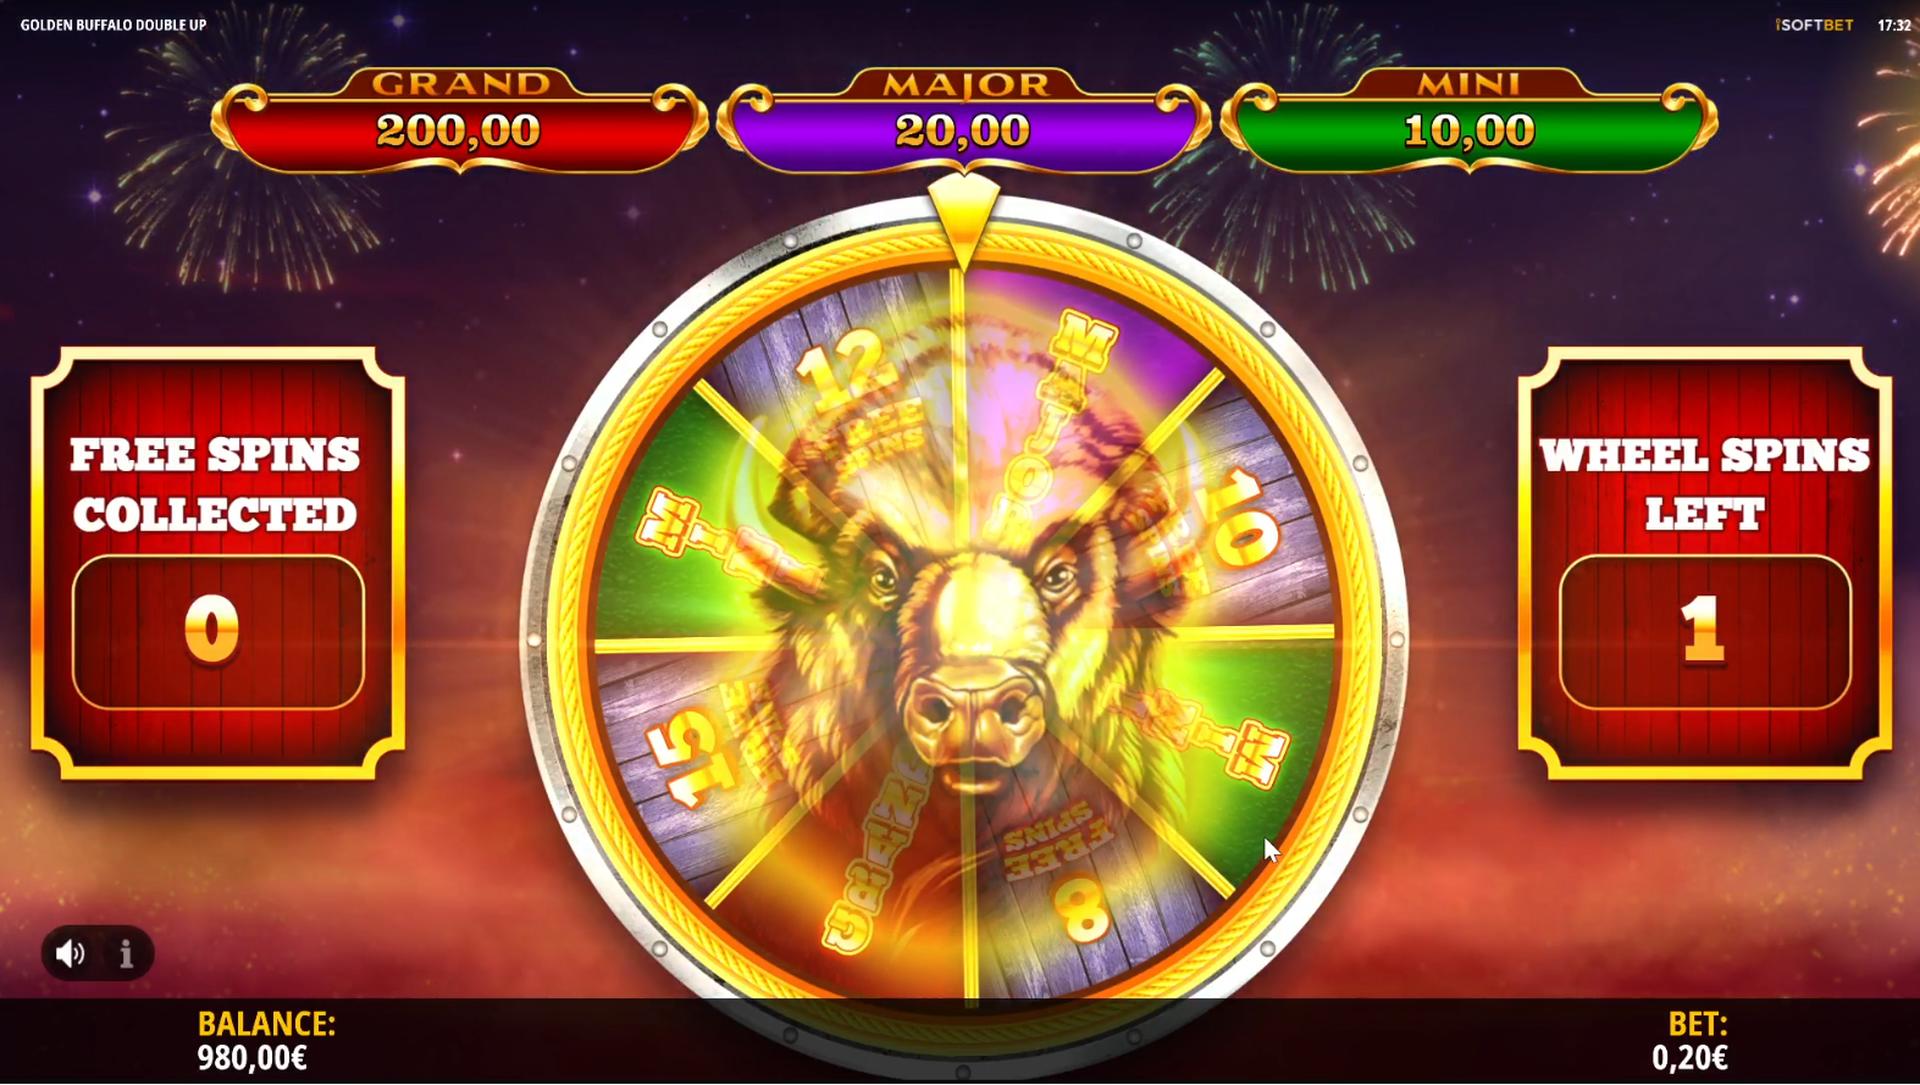 Advantages of 1xbet Casino for Golden Buffalo Players